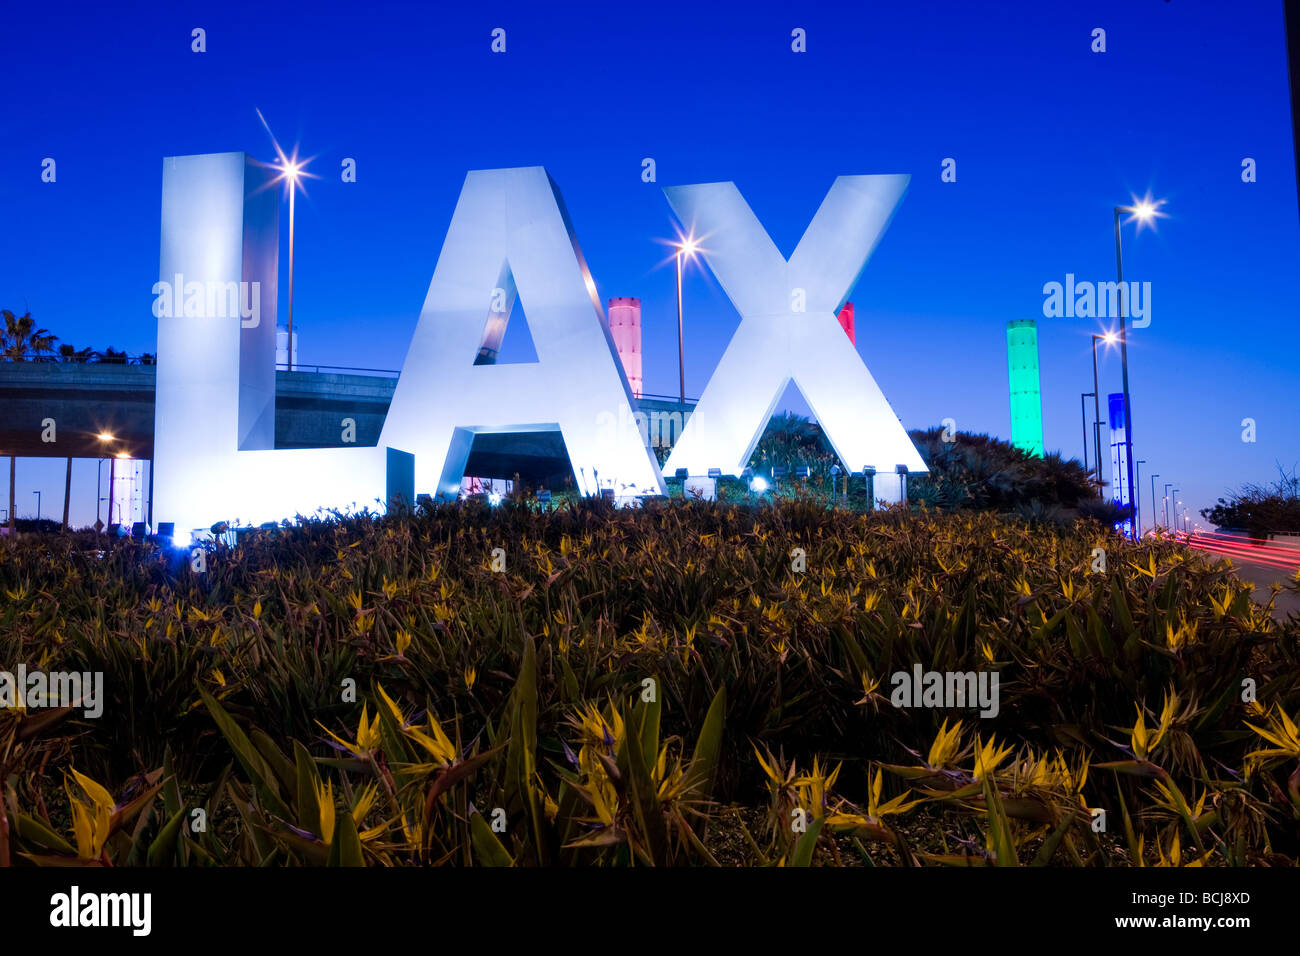 Three dimensional sign spelling out 'LAX' at entrance to Los  Angeles International Airport in Los Angeles, California; dusk. Stock Photo